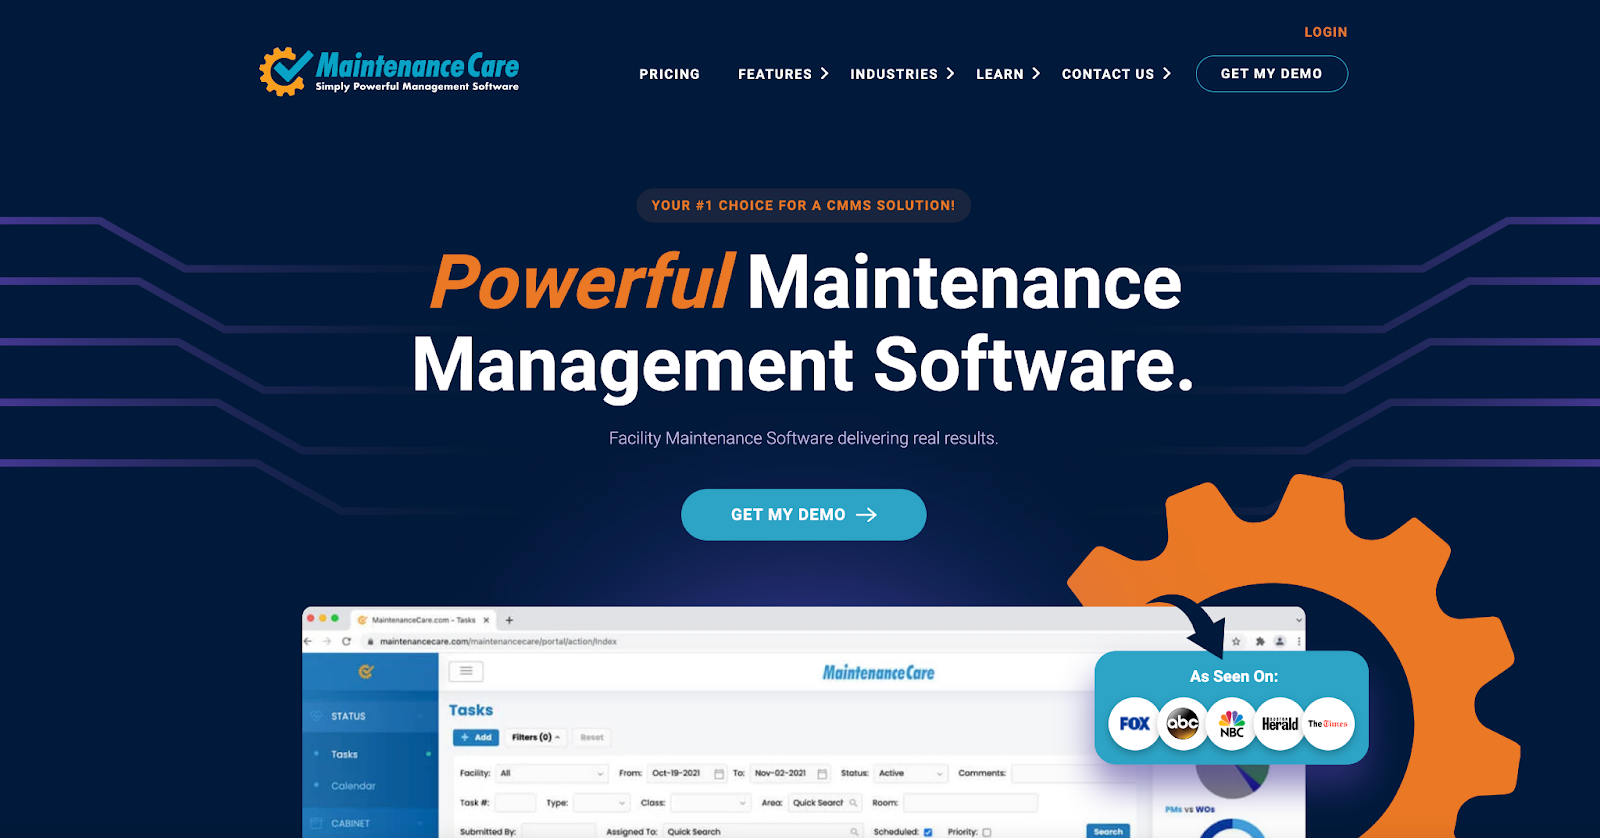 Maintenance Care's refreshed website, including elements from Kuno's revamped brand strategy